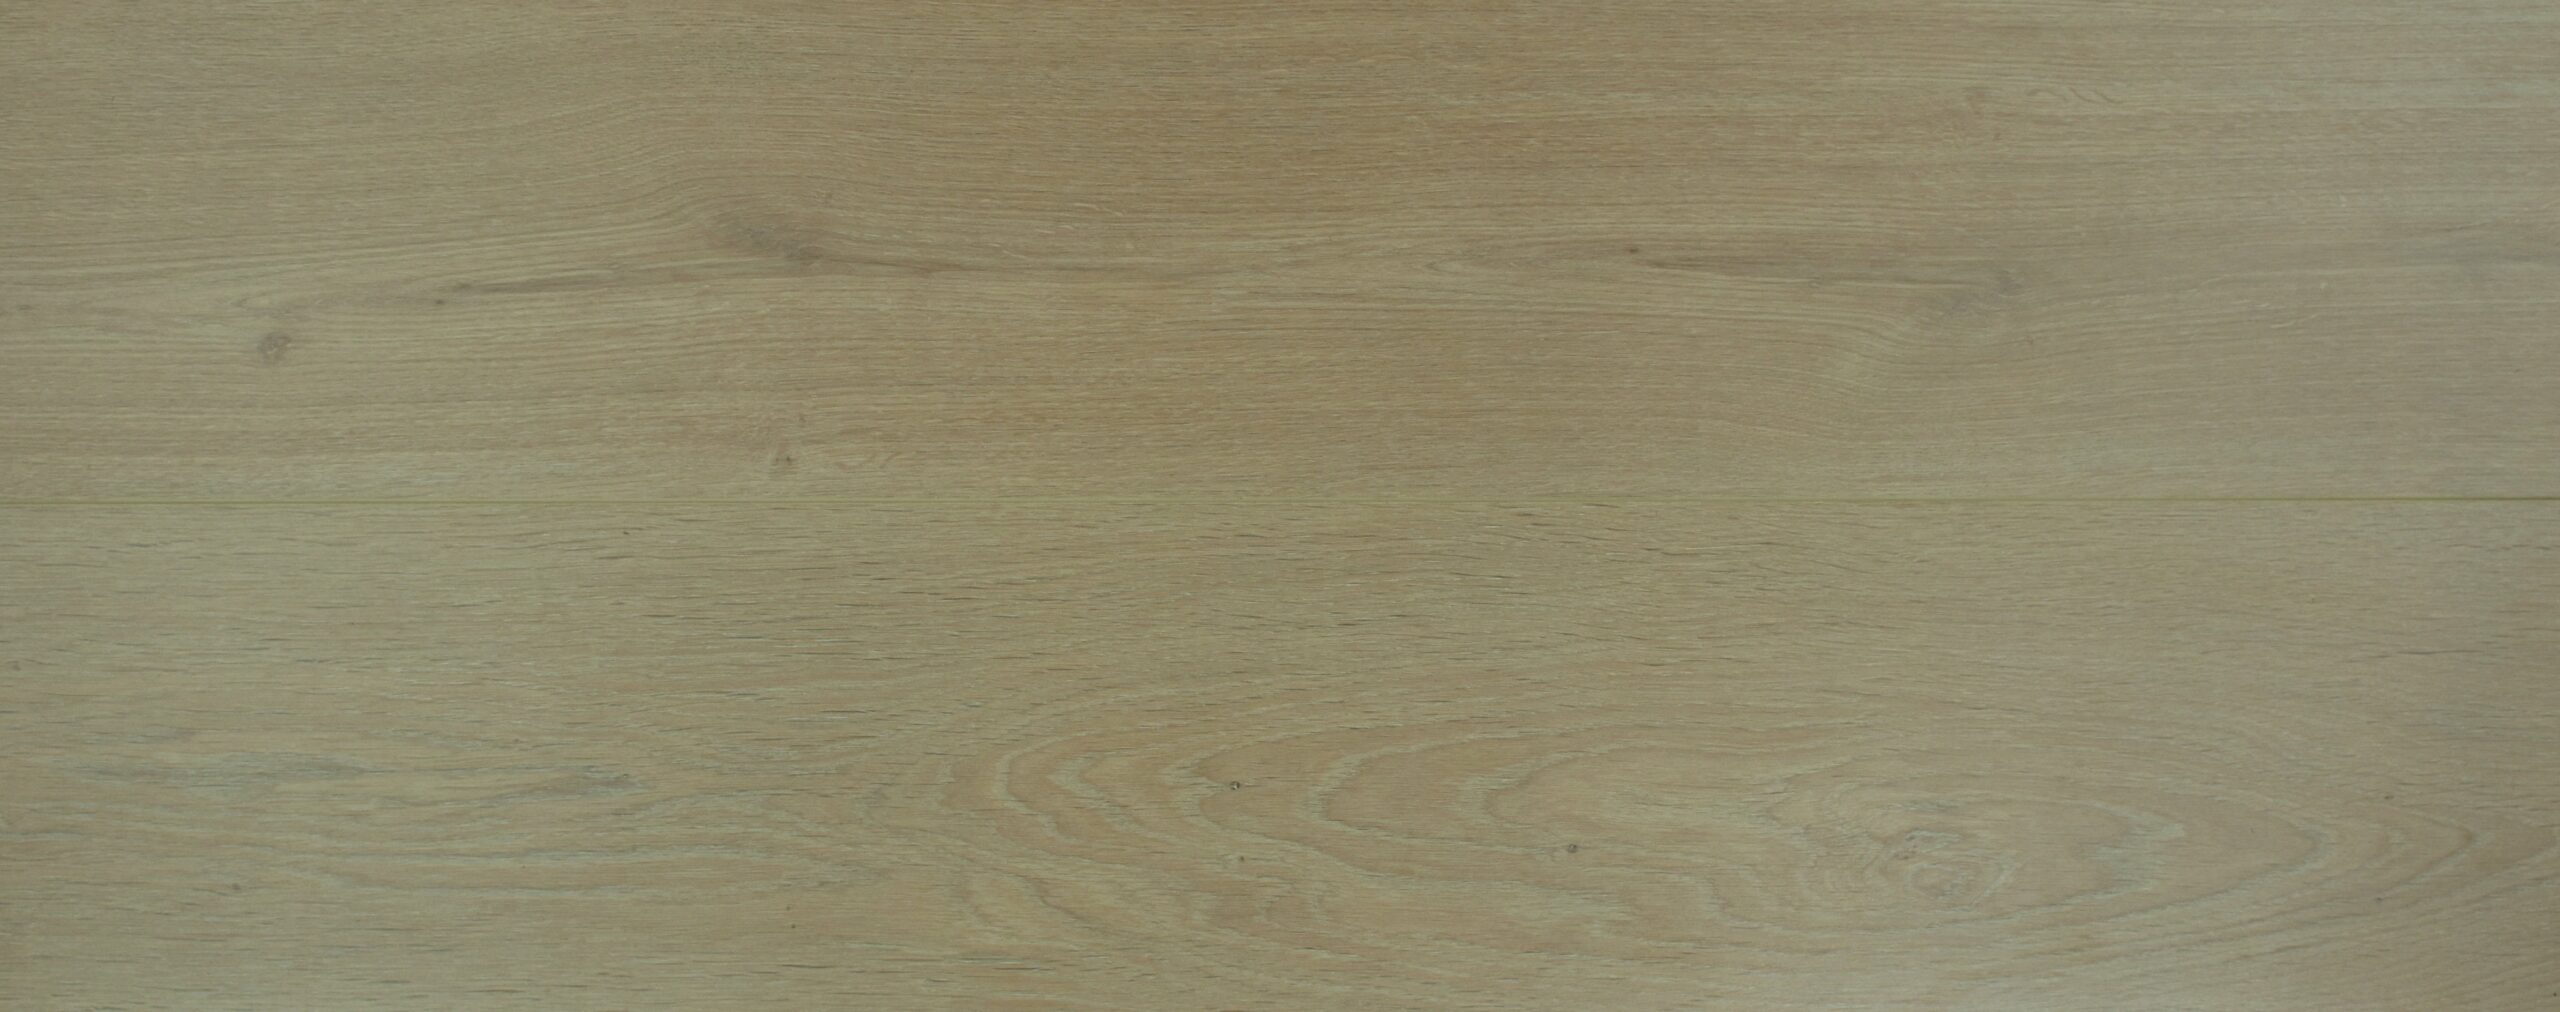 Light White Oak Optimum Laminate Flooring with Built-In EIR Backing and AC4 wear layer